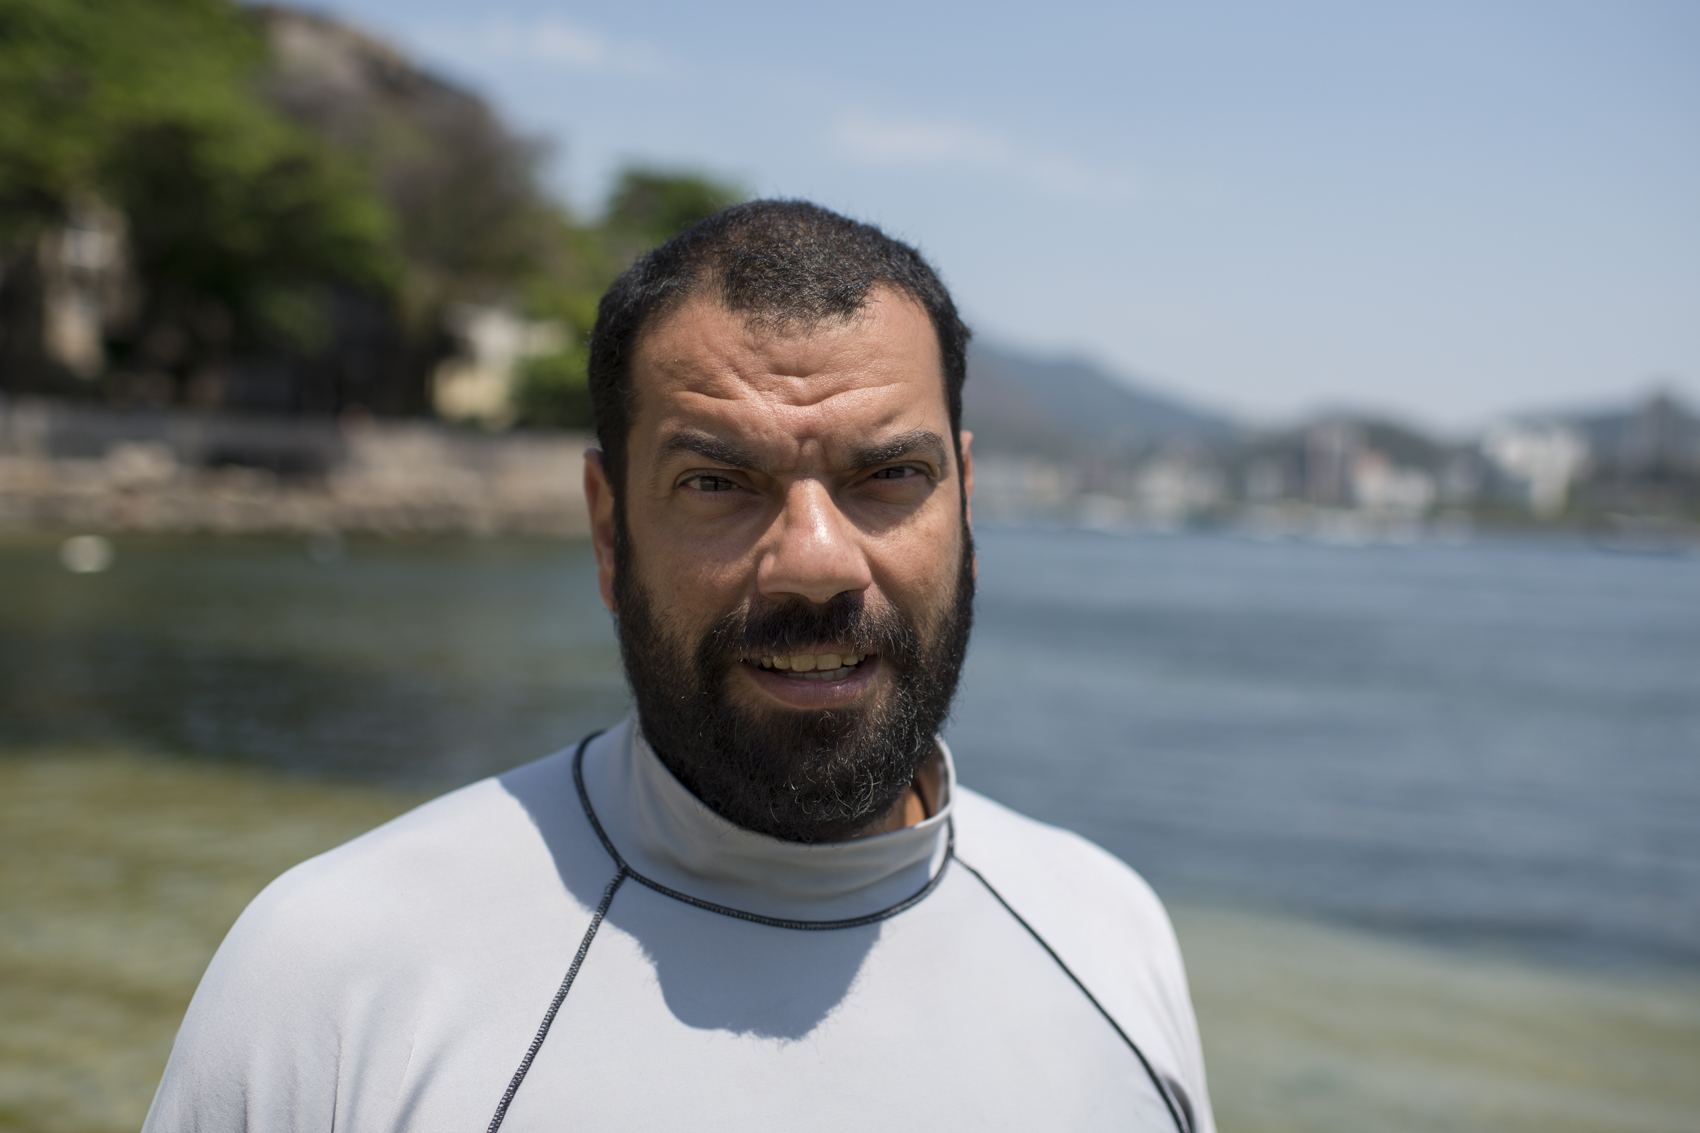  For the last 33 years, Ed dives at Urca Beach. This experience made possible for him to create a detailed map of the bottom of the sea, and a complete catalog of species that live there, all in his head. The environmentalist and educator made the pl